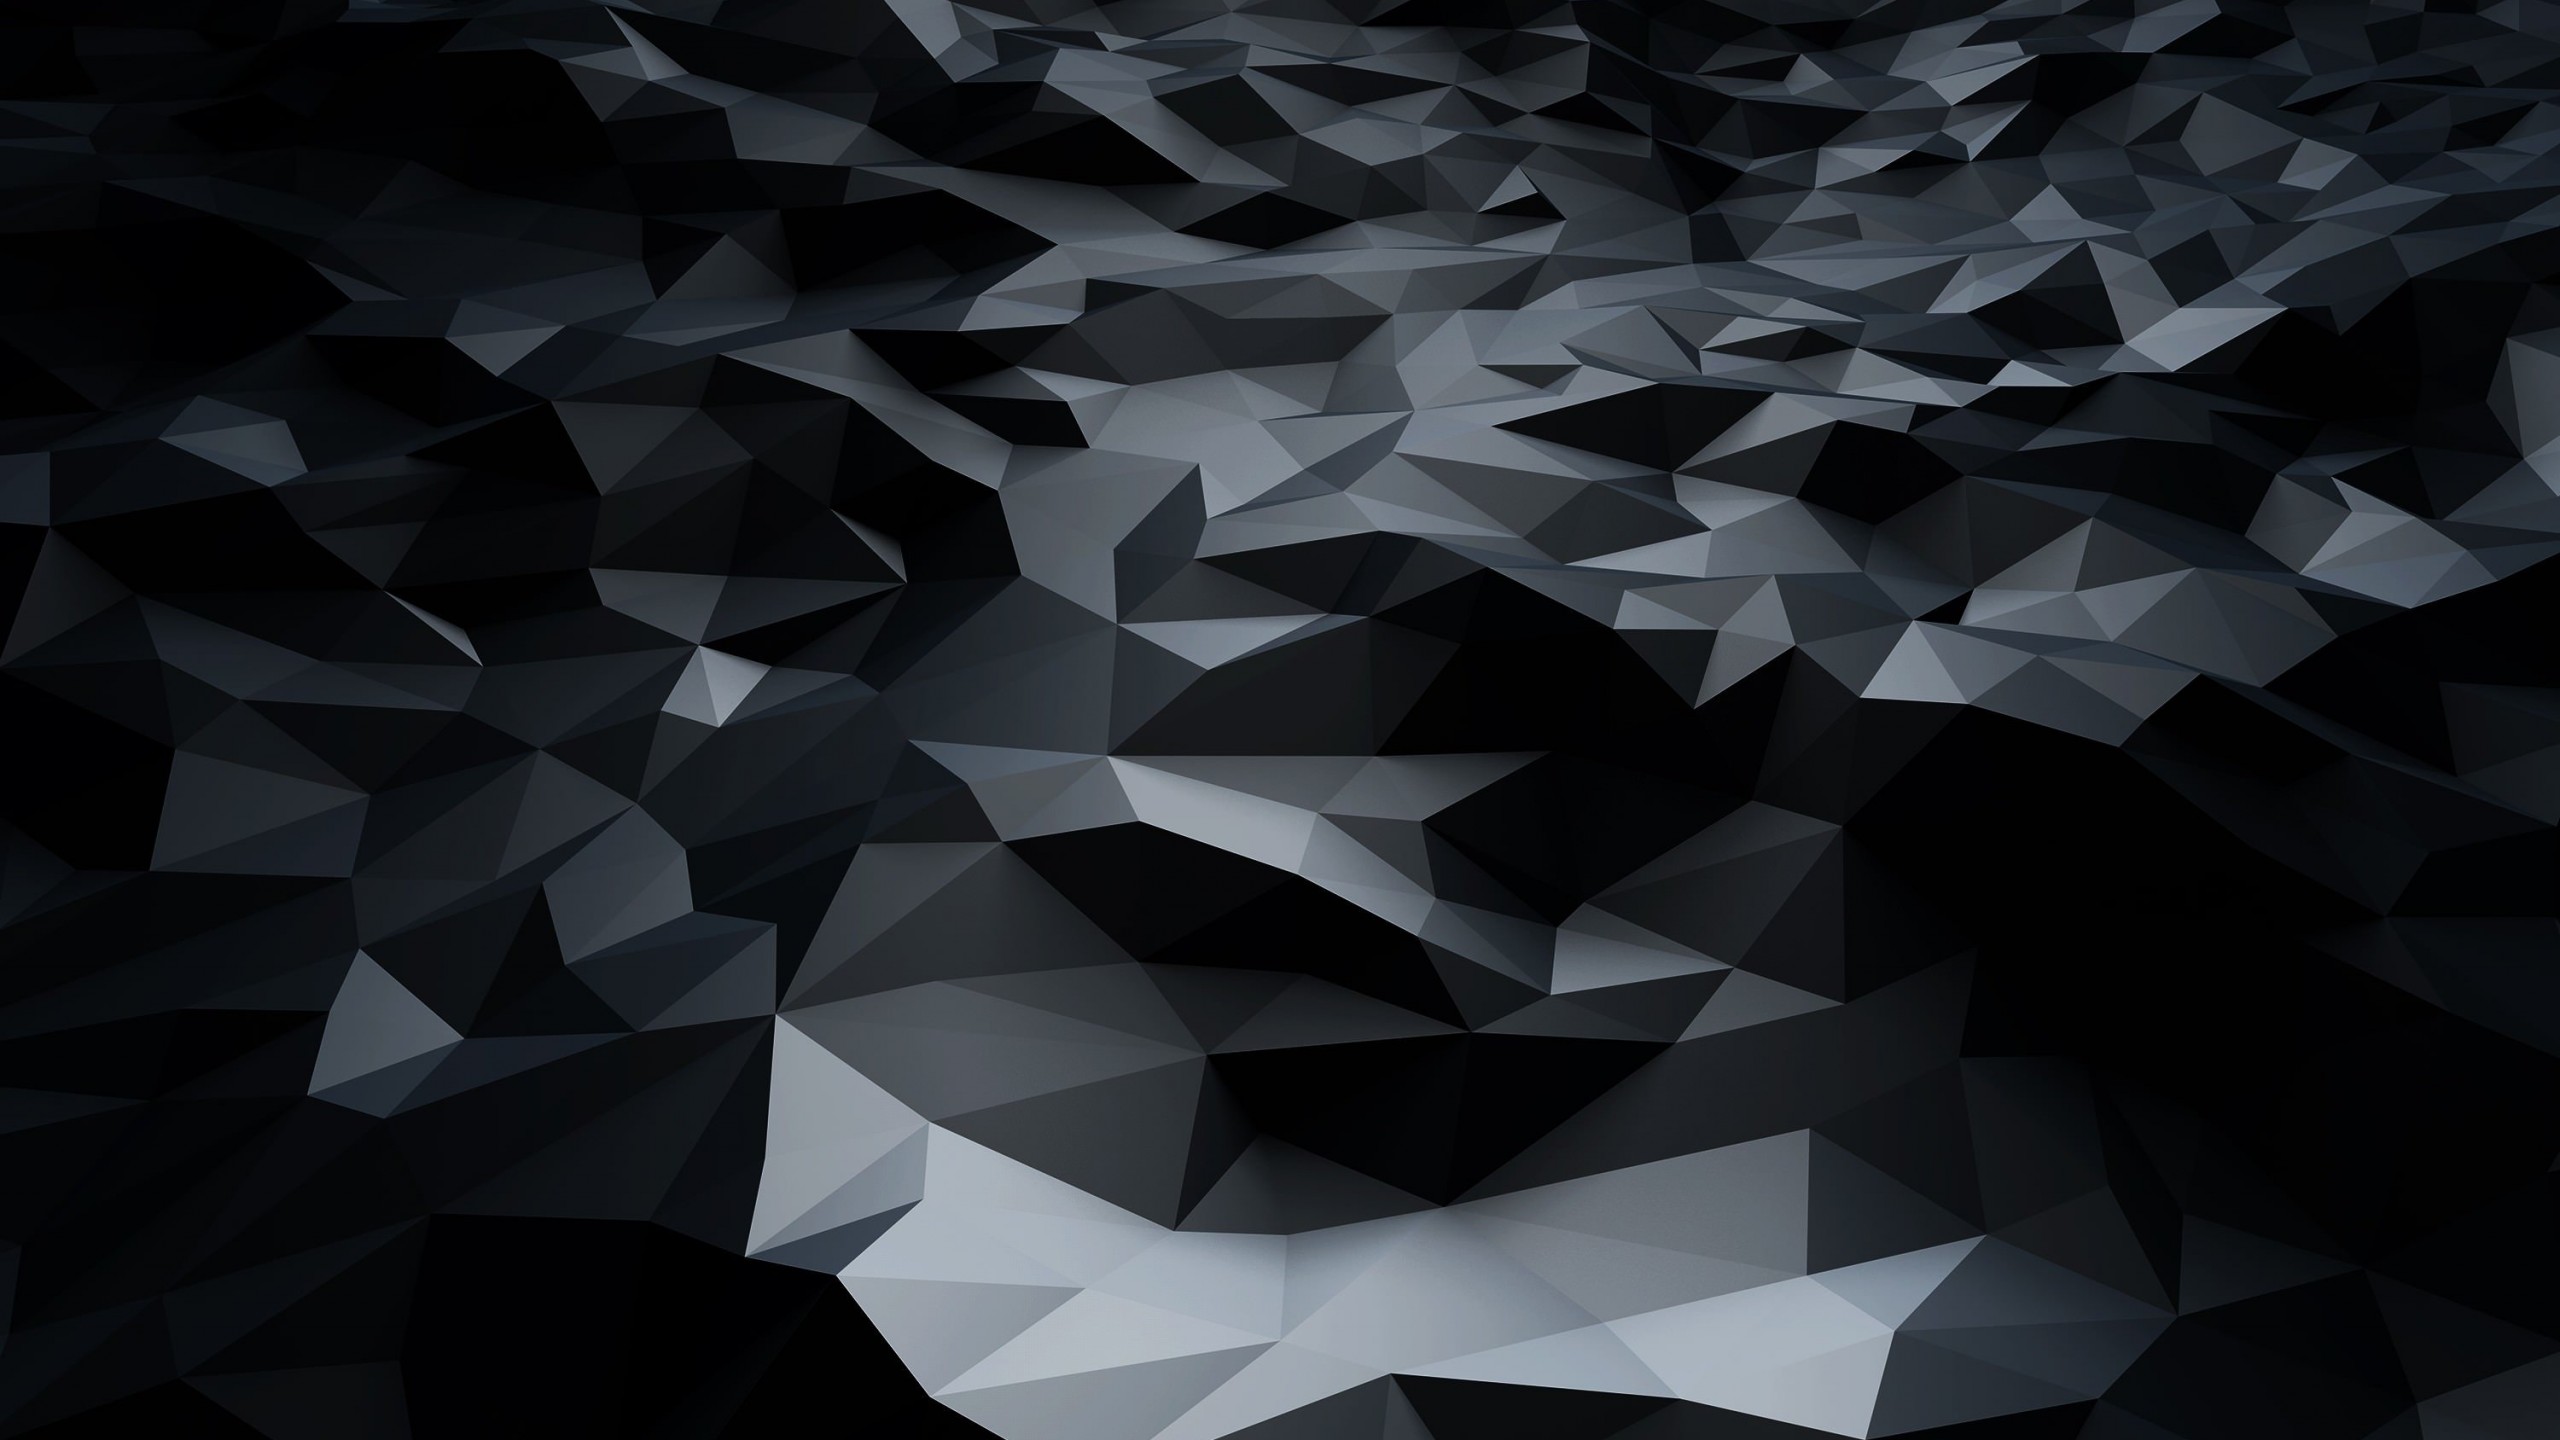 Abstract Black Low Poly Wallpaper for Social Media YouTube Channel Art